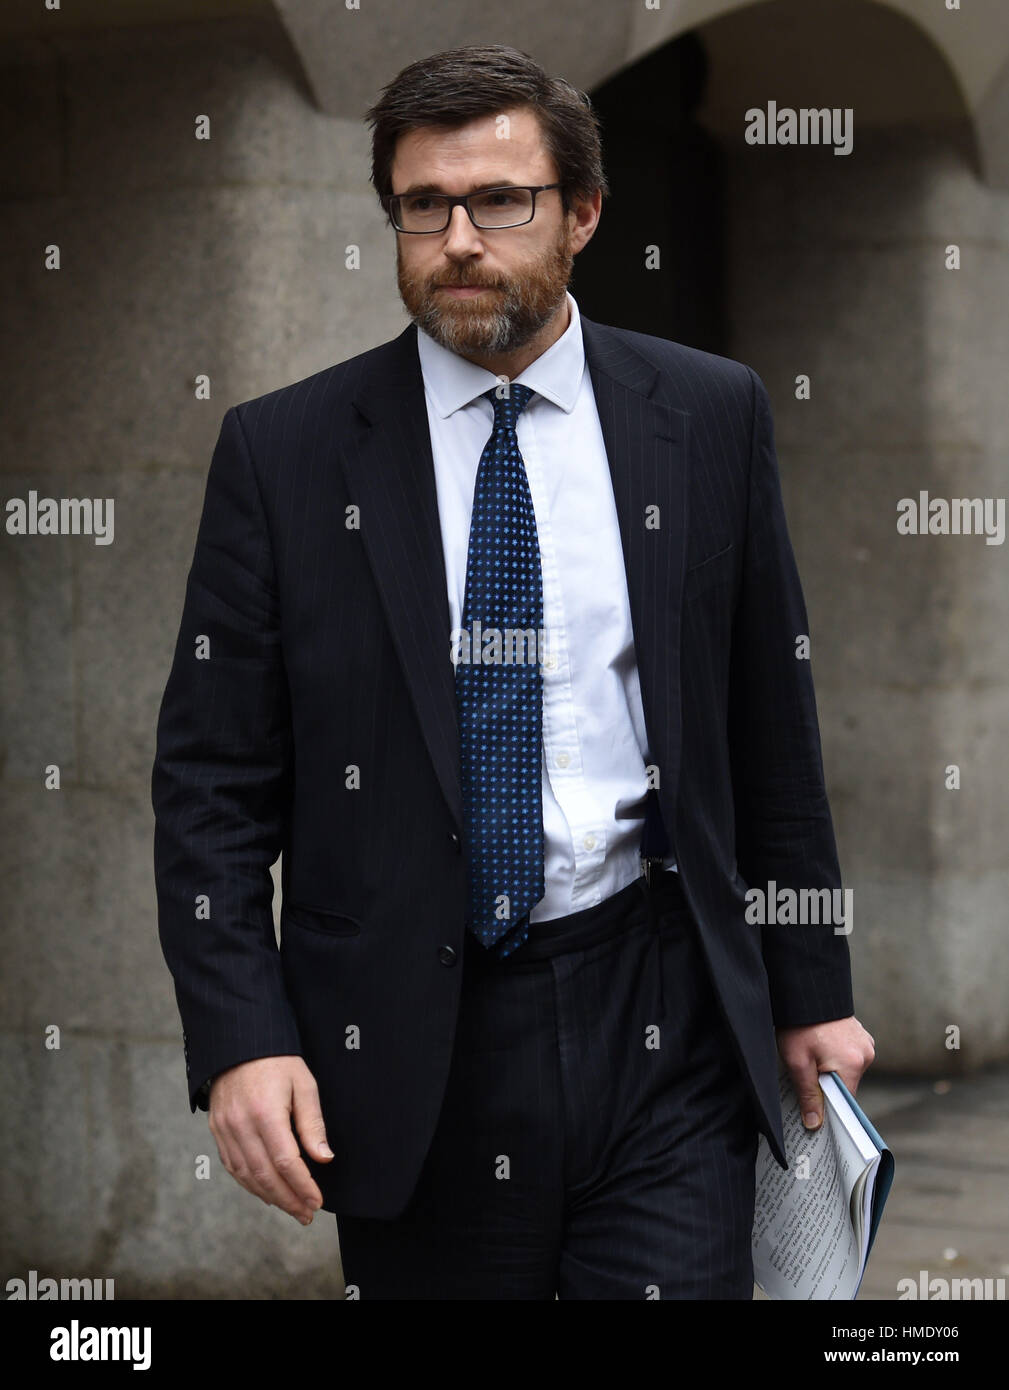 Deputy Chief Crown Prosecutor Malcolm McHaffie speaks outside the Old Bailey in London, after Joshua Dobby, 23, pleaded guilty to the manslaughter of child actor Makayah McDermott, 10, and his aunt Rosie Cooper, 34, who were mown down in Penge in August following a police chase. Stock Photo